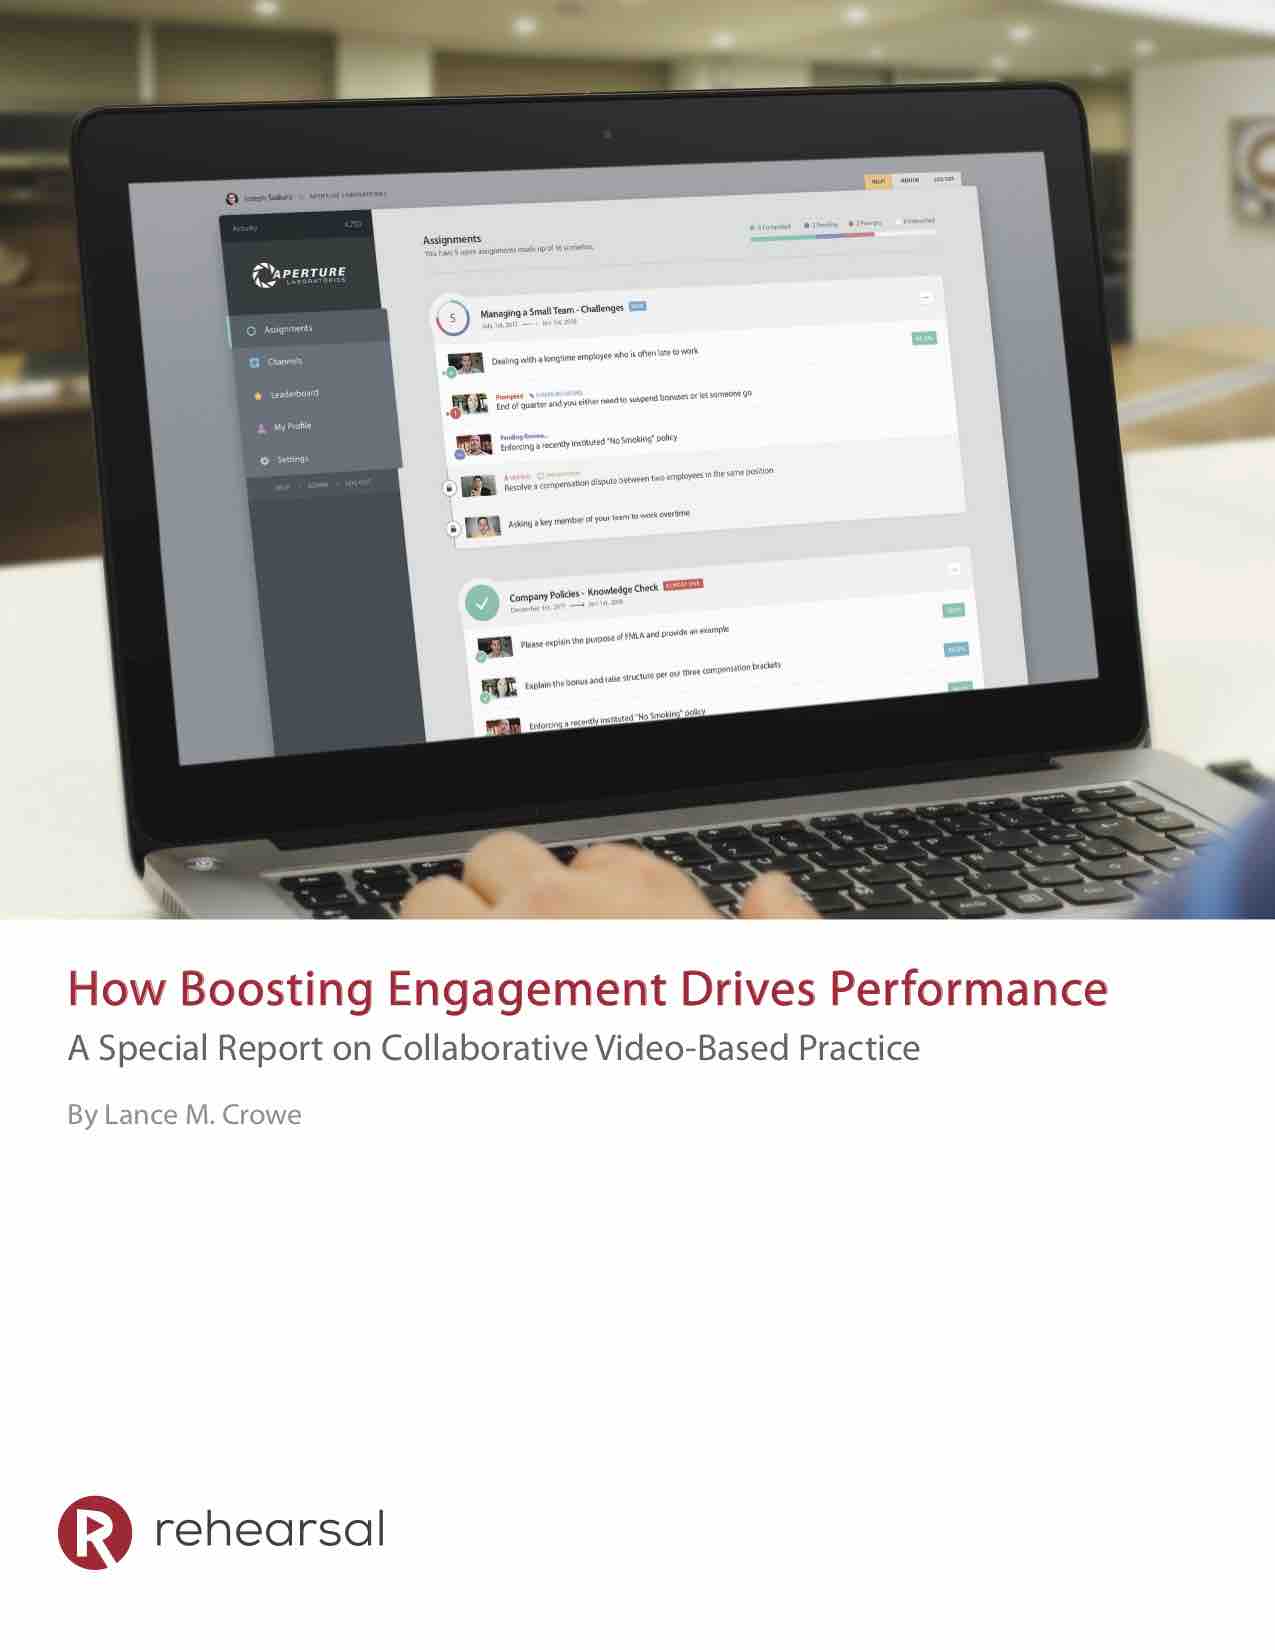 How Boosting Engagement Drives Performance White Paper Cover